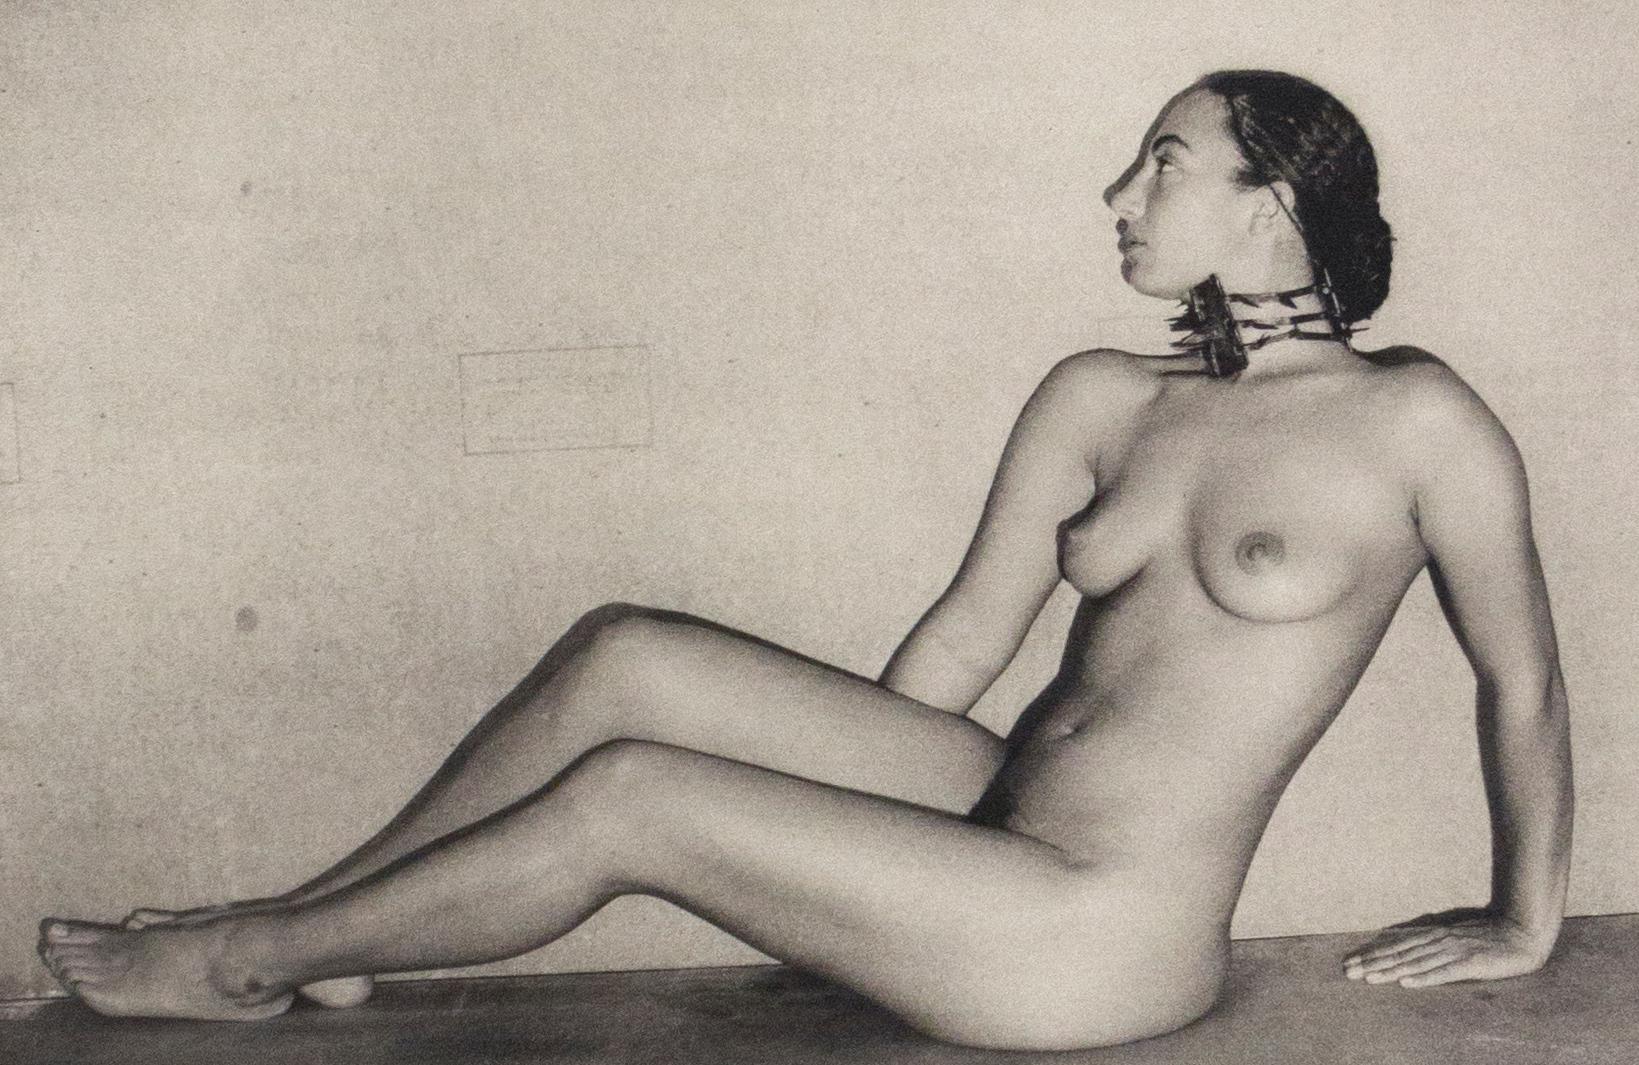 Nude with One Thing On - Photograph by Sheila Metzner